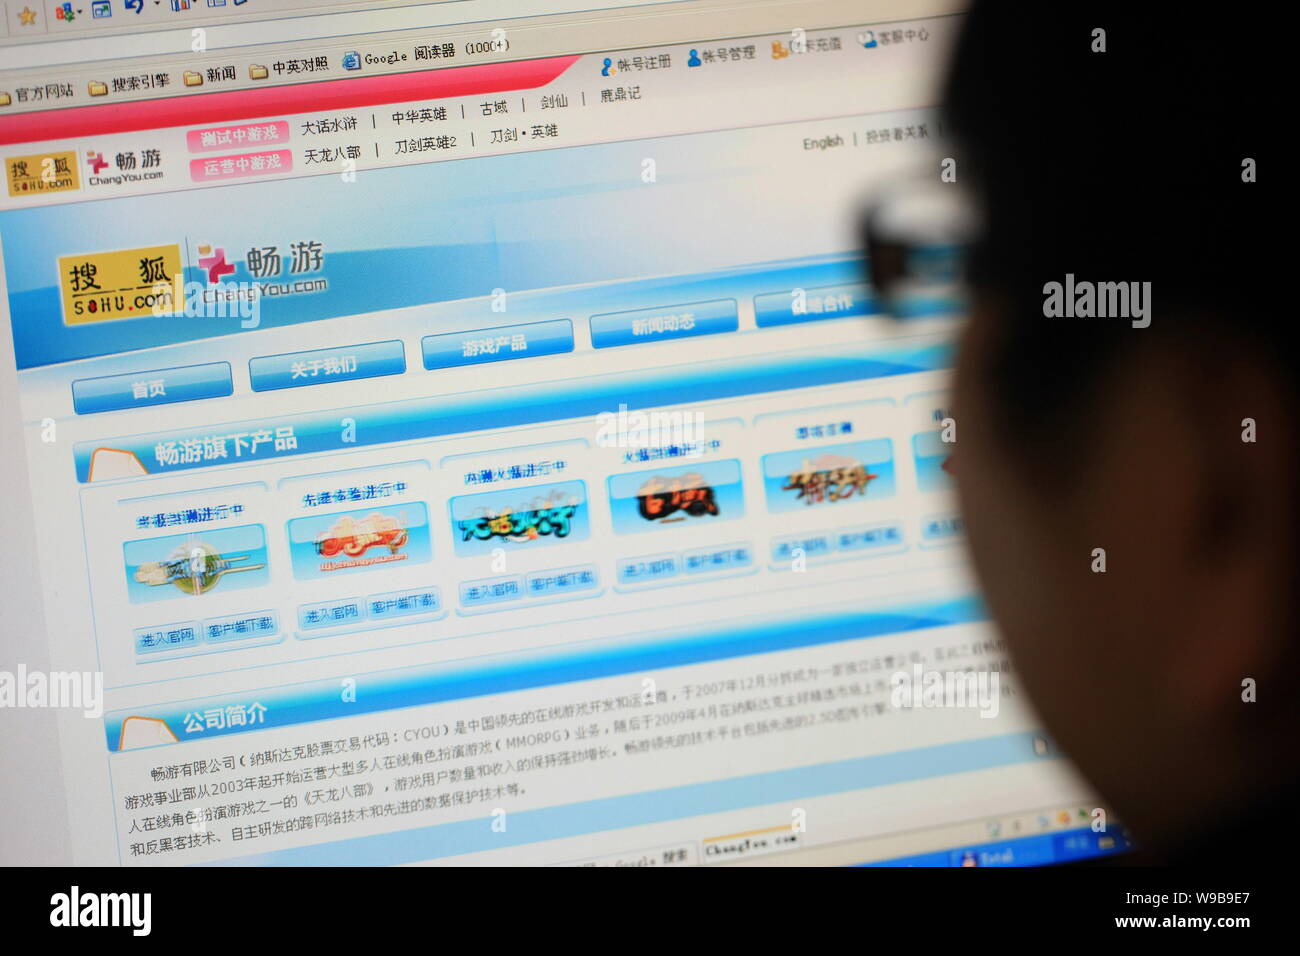 All chat web in Shanghai